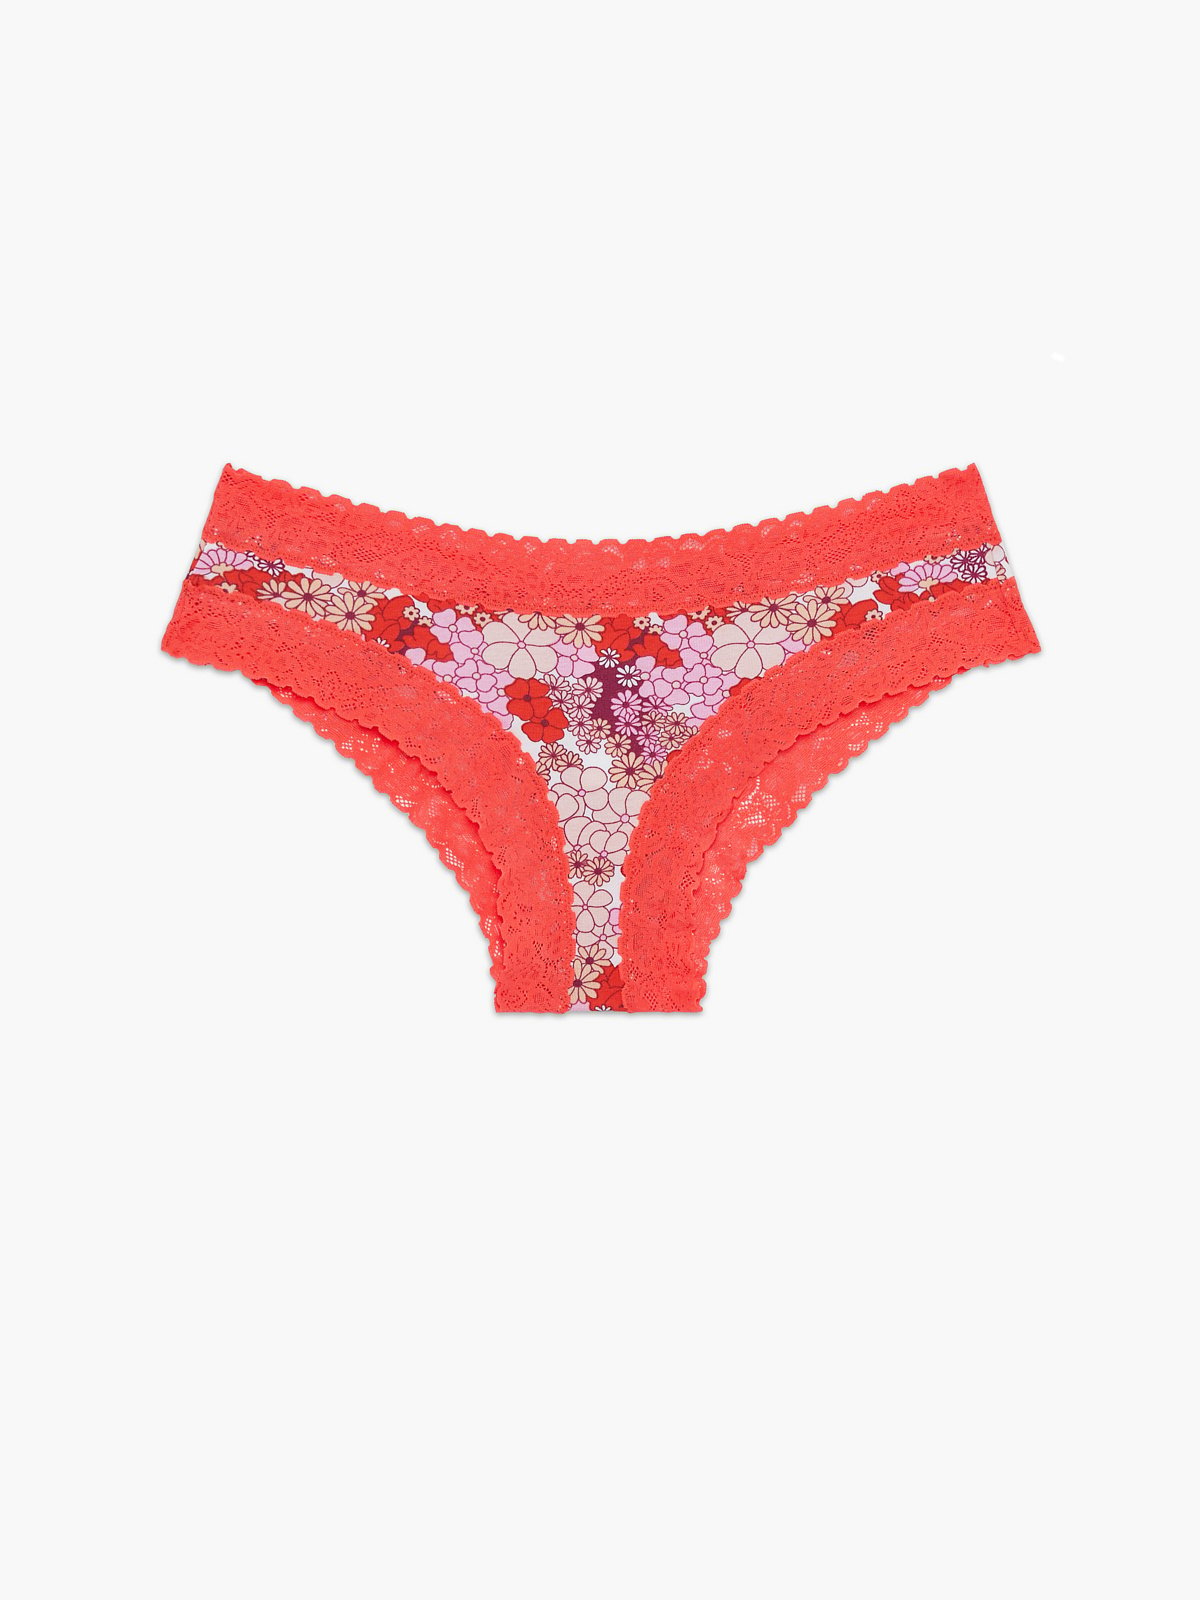 Cotton Essentials Lace-Trim Cheeky Panty in Multi & Pink & Red